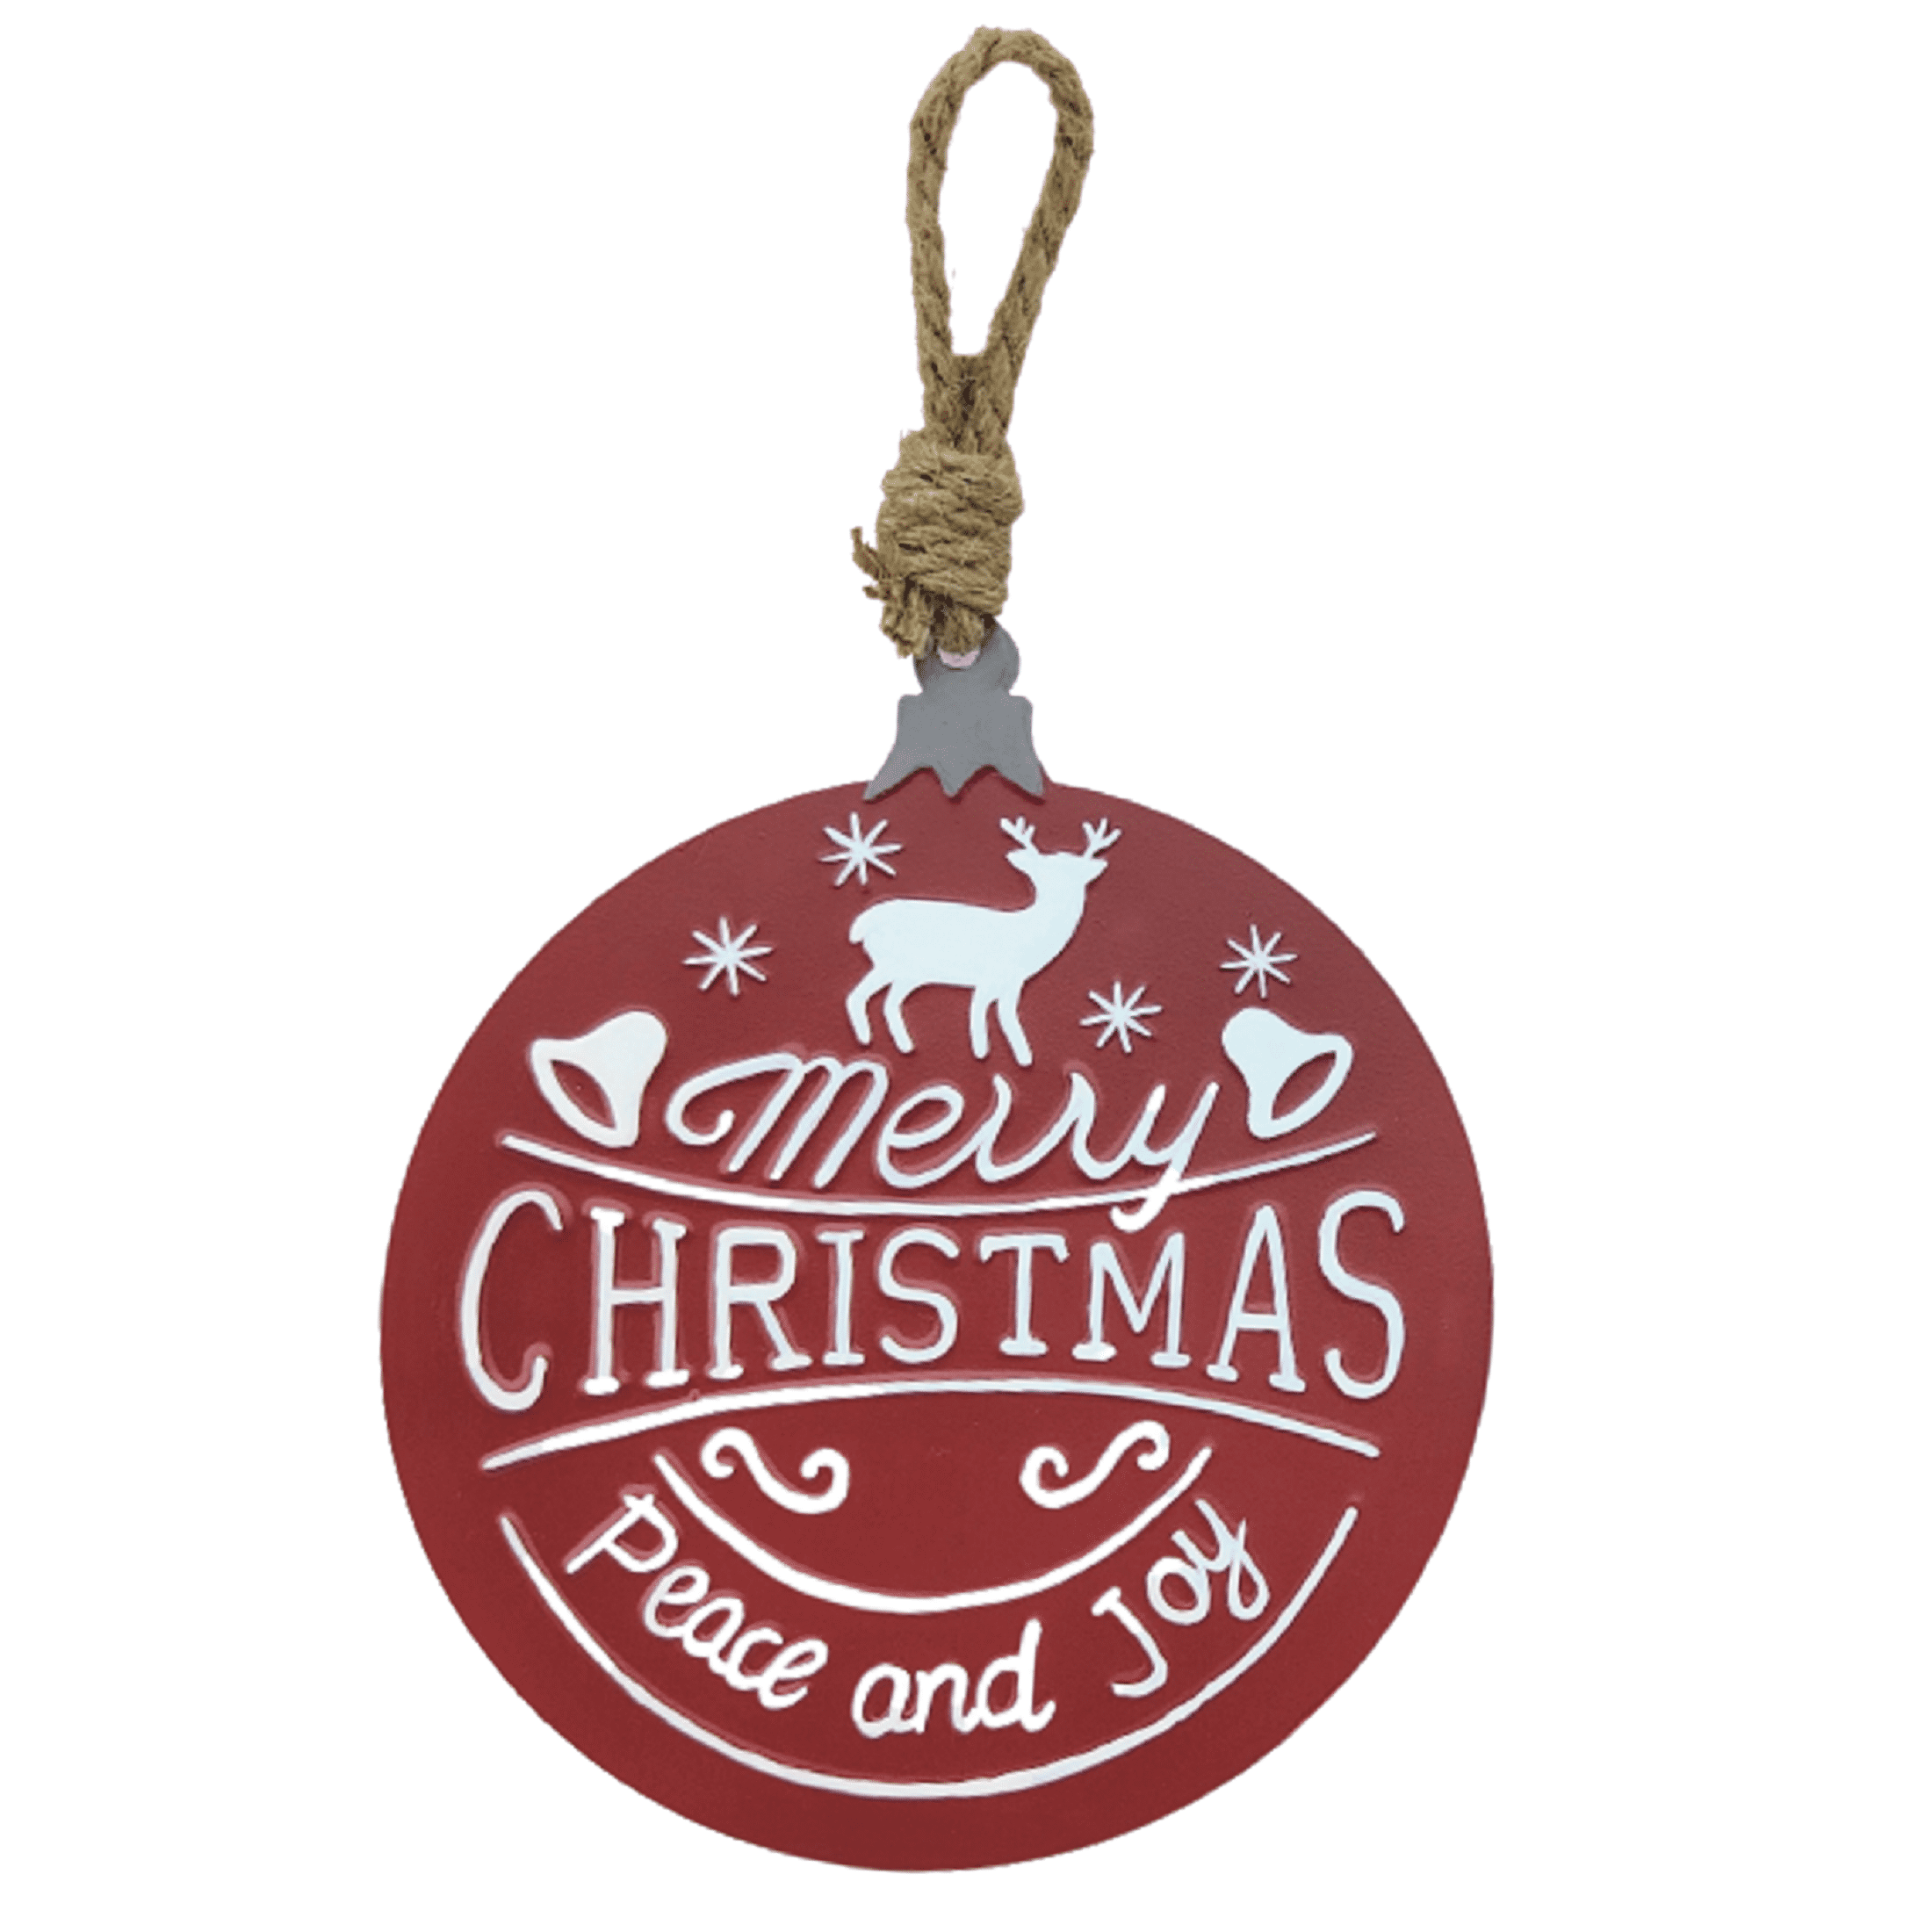 Holiday Time Red Christmas Metal Ornament. Holly Holiday Theme. Red & White Color. Round Metal Slice Ornament